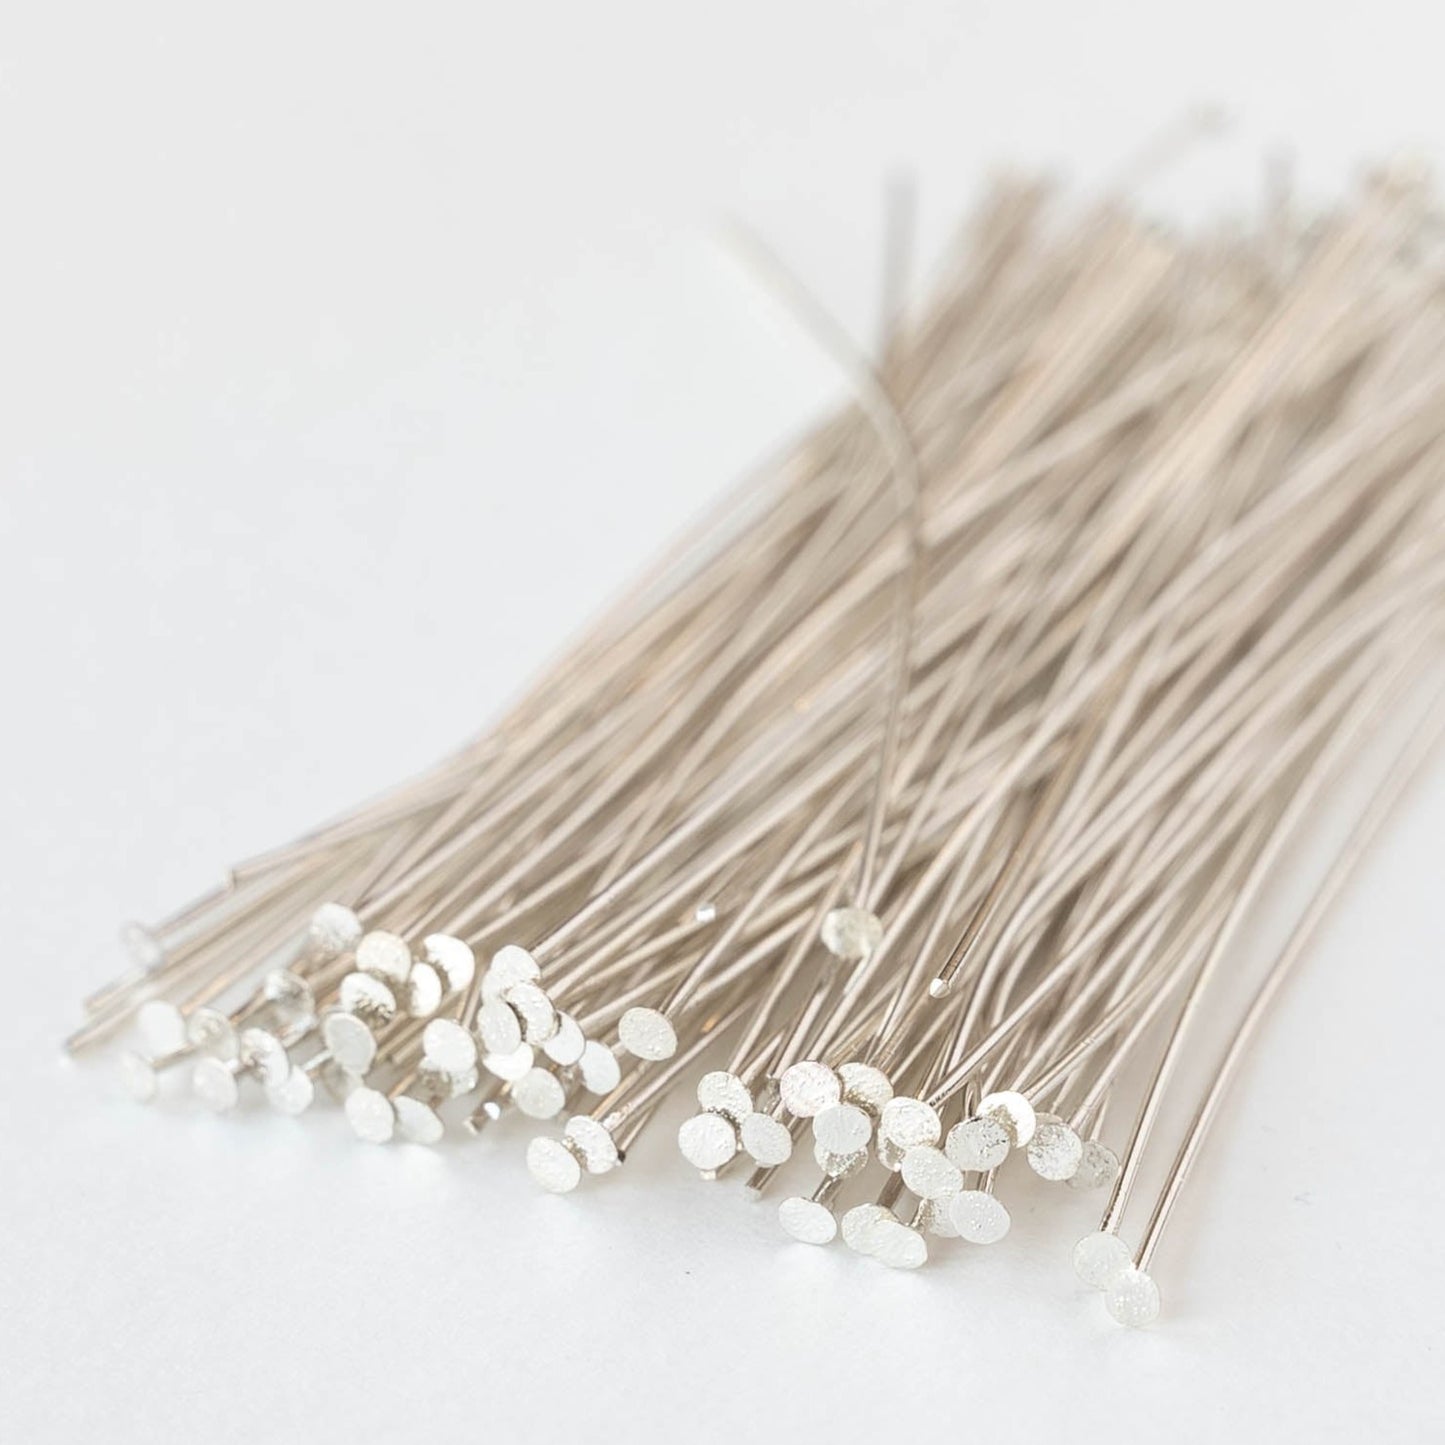 3 Inch Silver Plated Headpins - Choose Amount